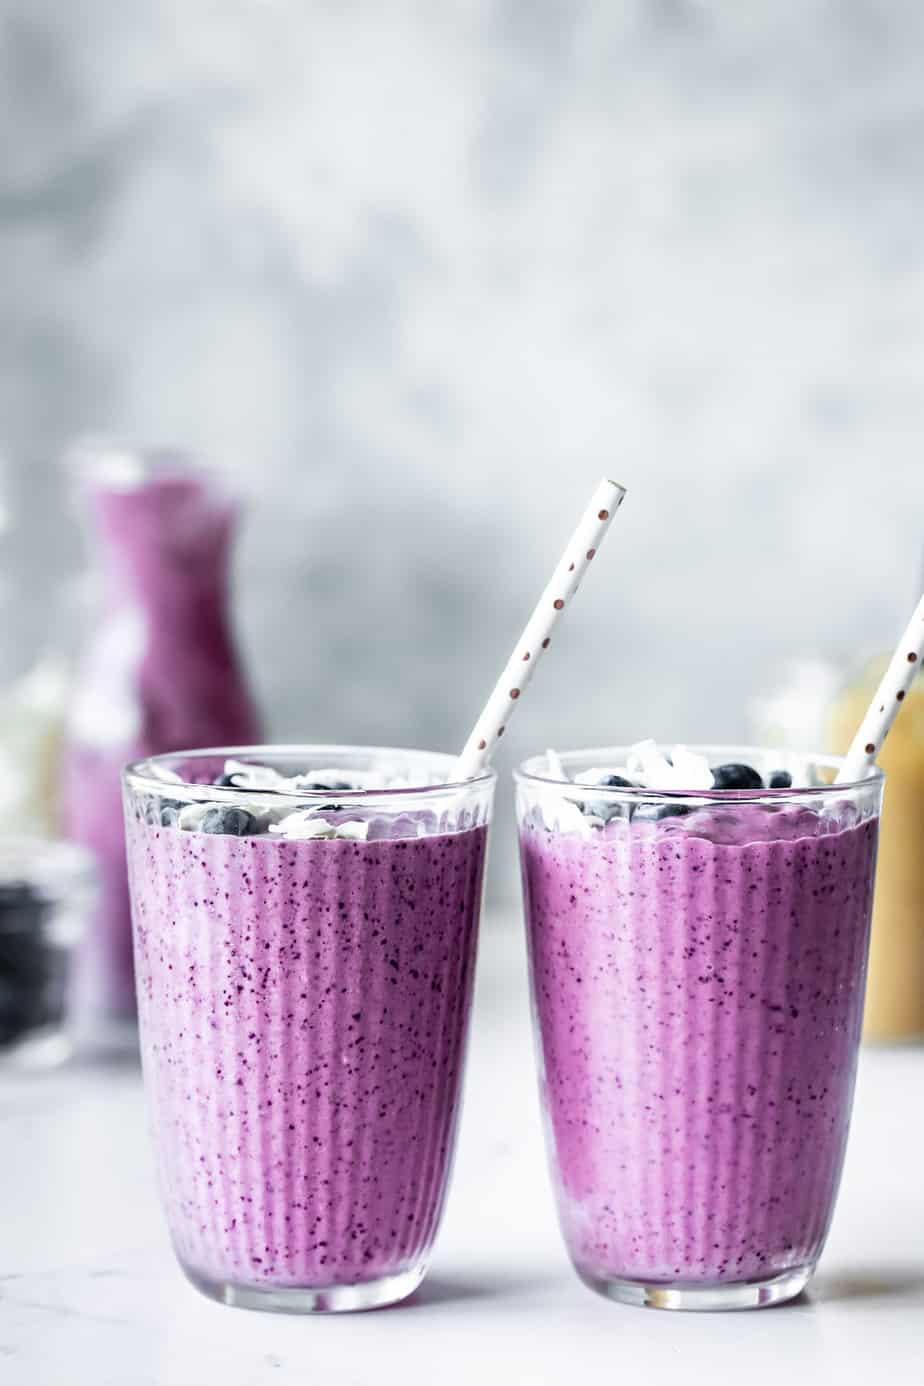 blueberry pineapple smoothies in glasses with straws